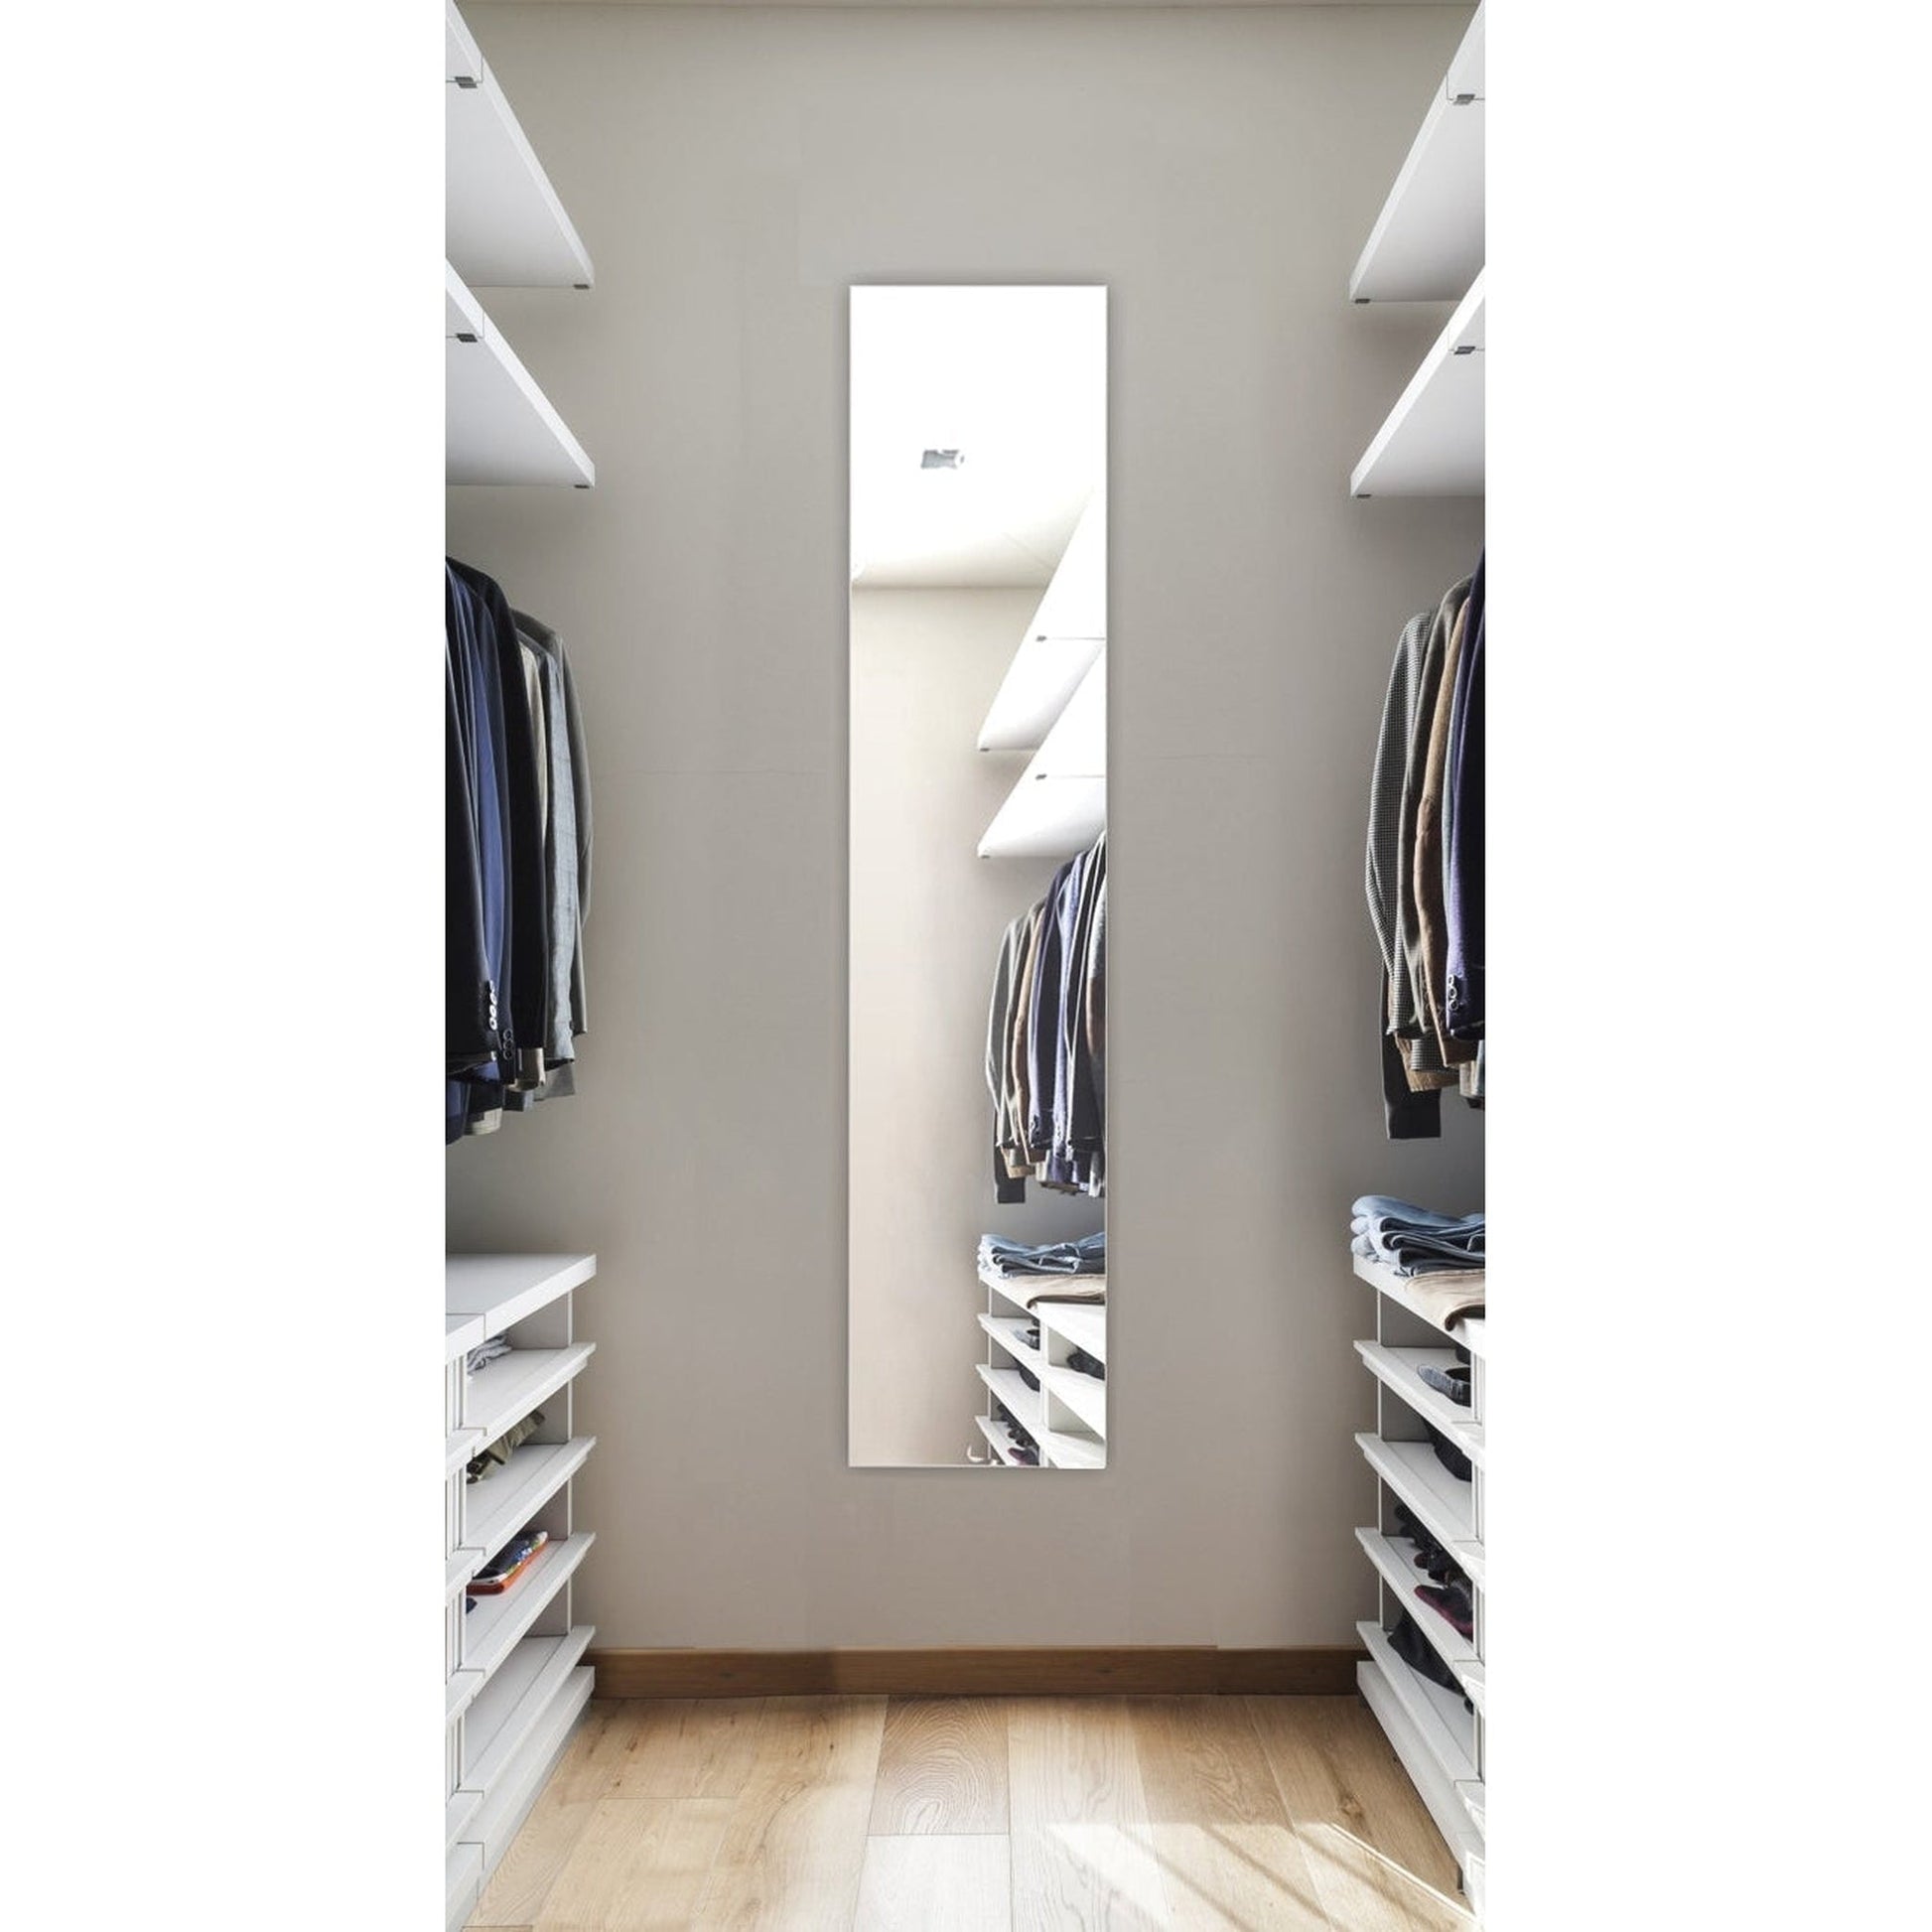 Sidler Tall 15" x 60" x 6" Full Length Right Hinged Mirror Door Anodized Aluminum Medicine Cabinet